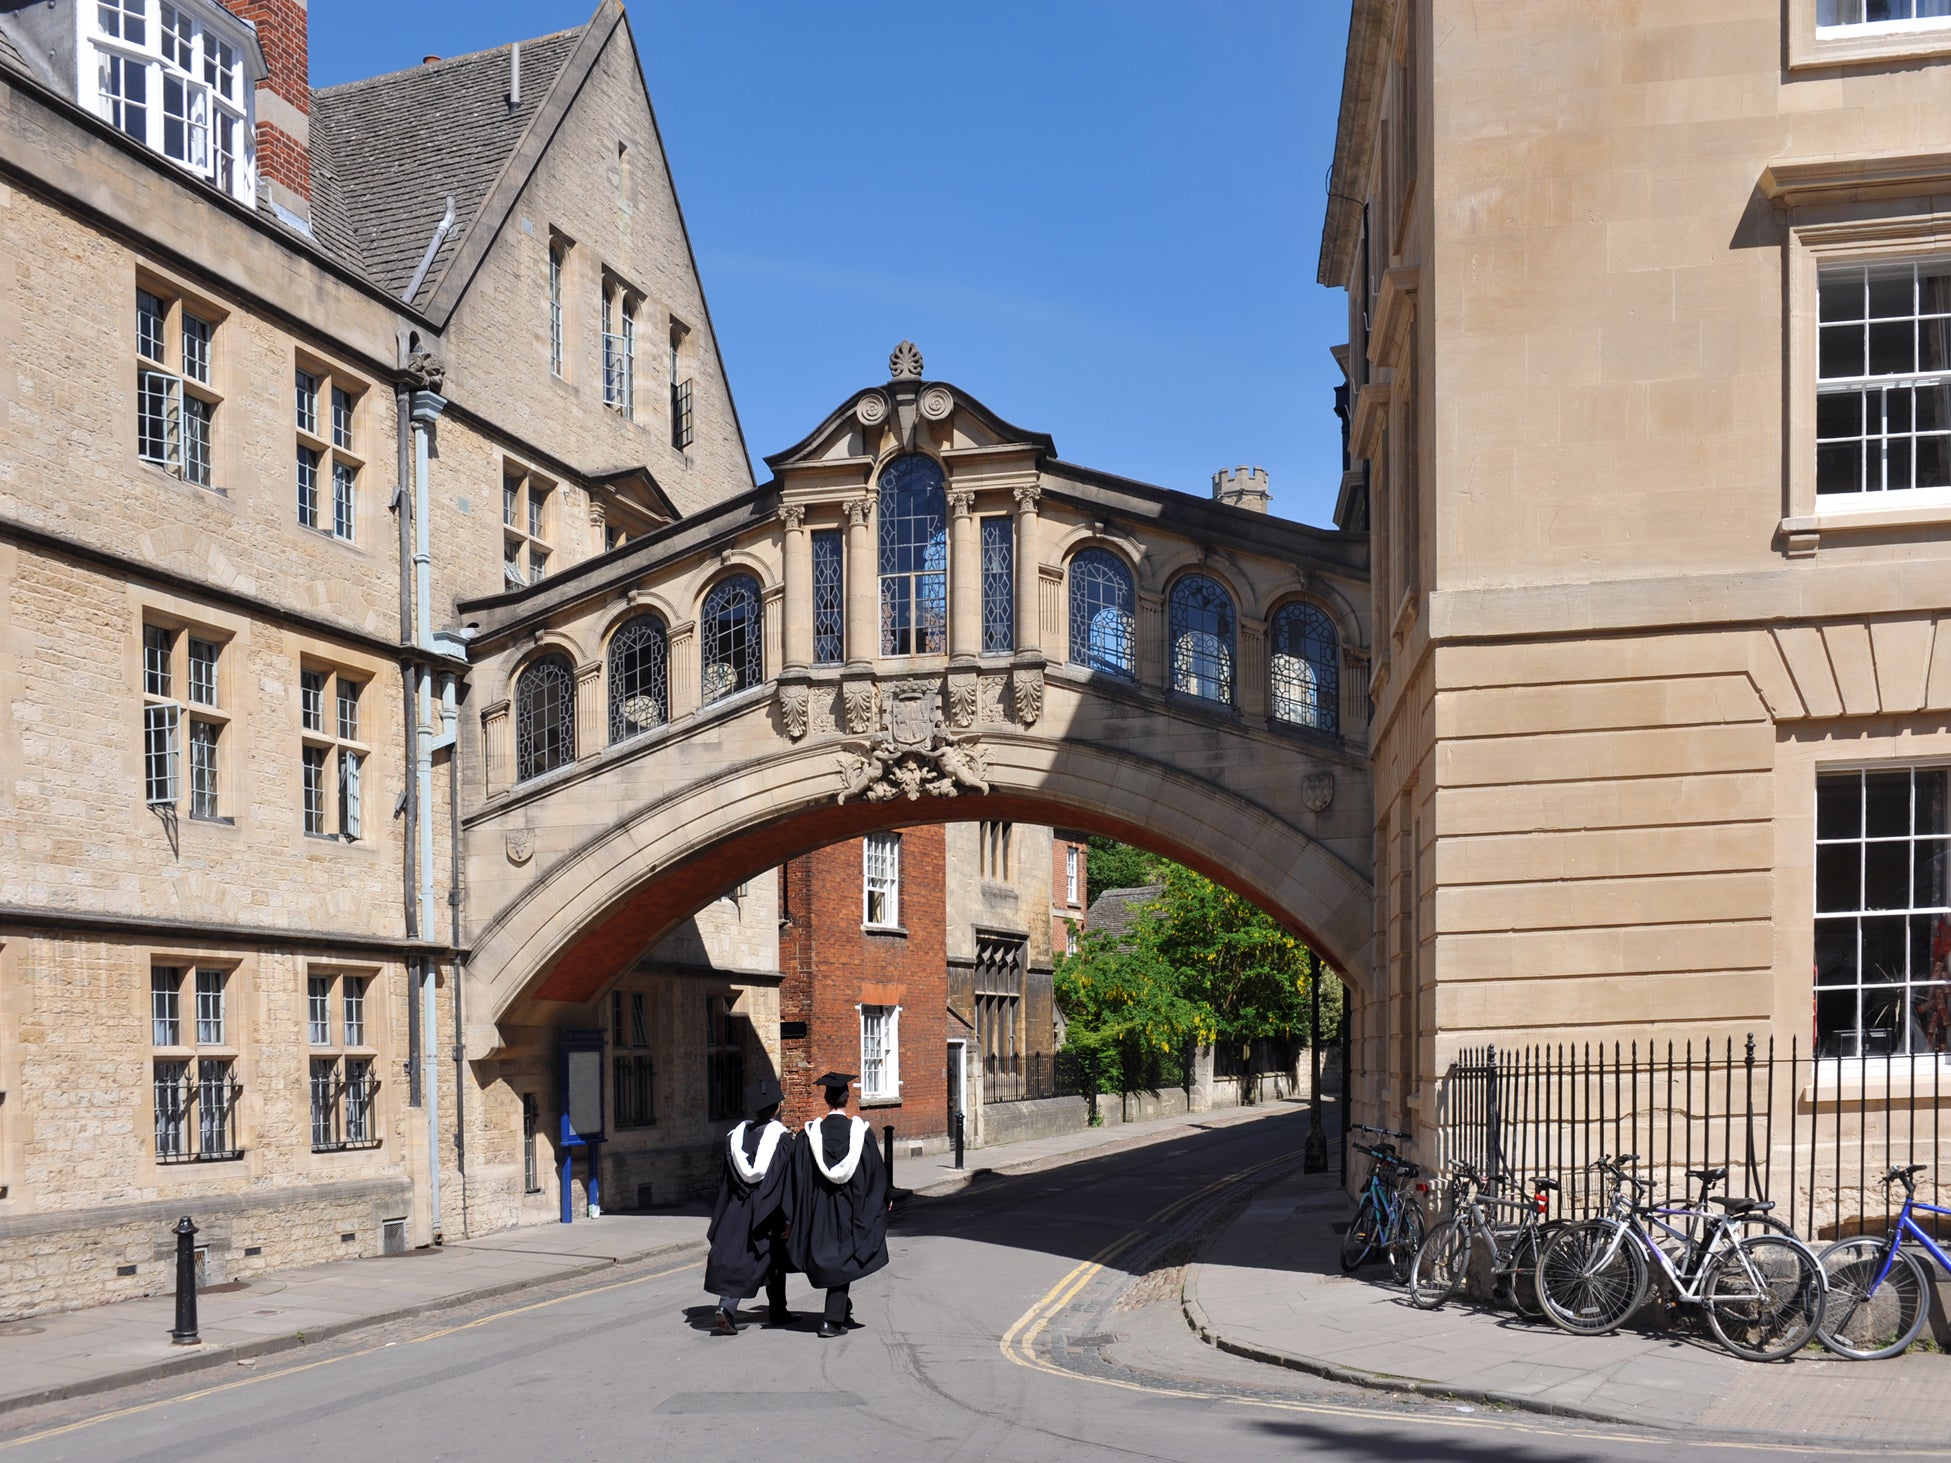 Oxford University has been named as the best in the world in a global ranking